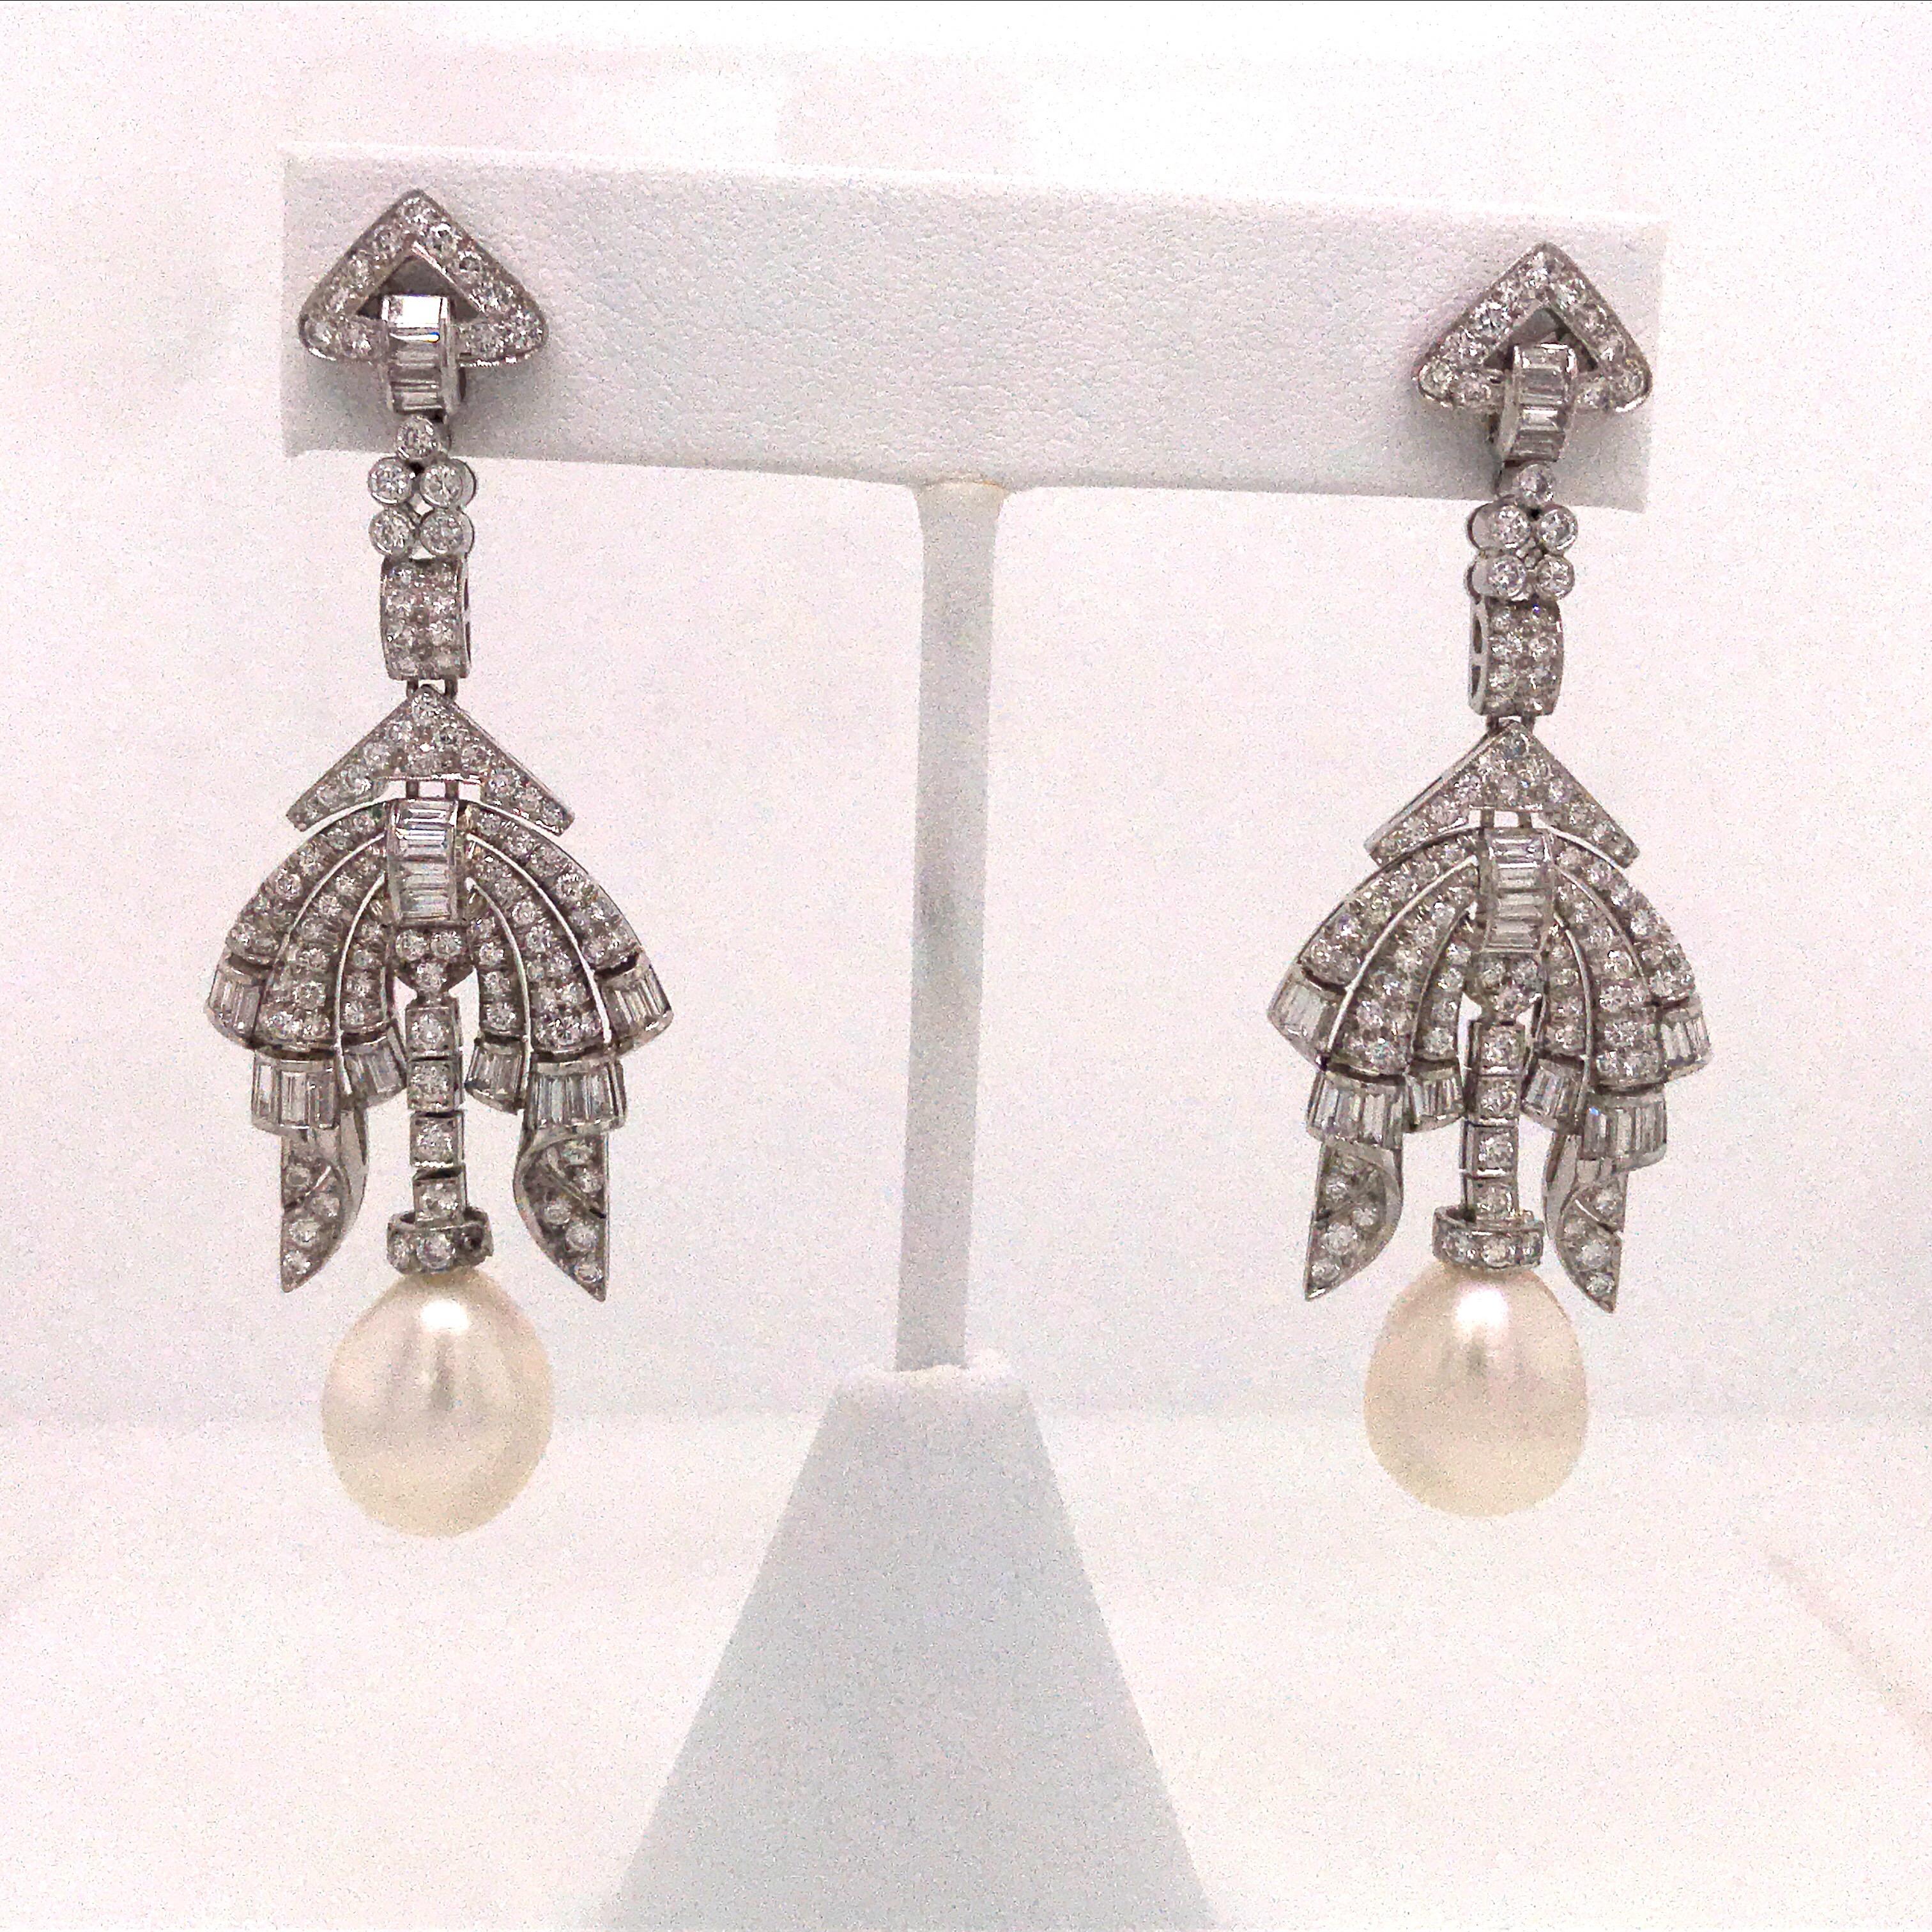 Circa 1950's drop earrings featuring numerous round diamonds and baguettes weighing approximately 4.50 carats and two oval shape pearls measuring 12 mm.

Very Dramatic!!